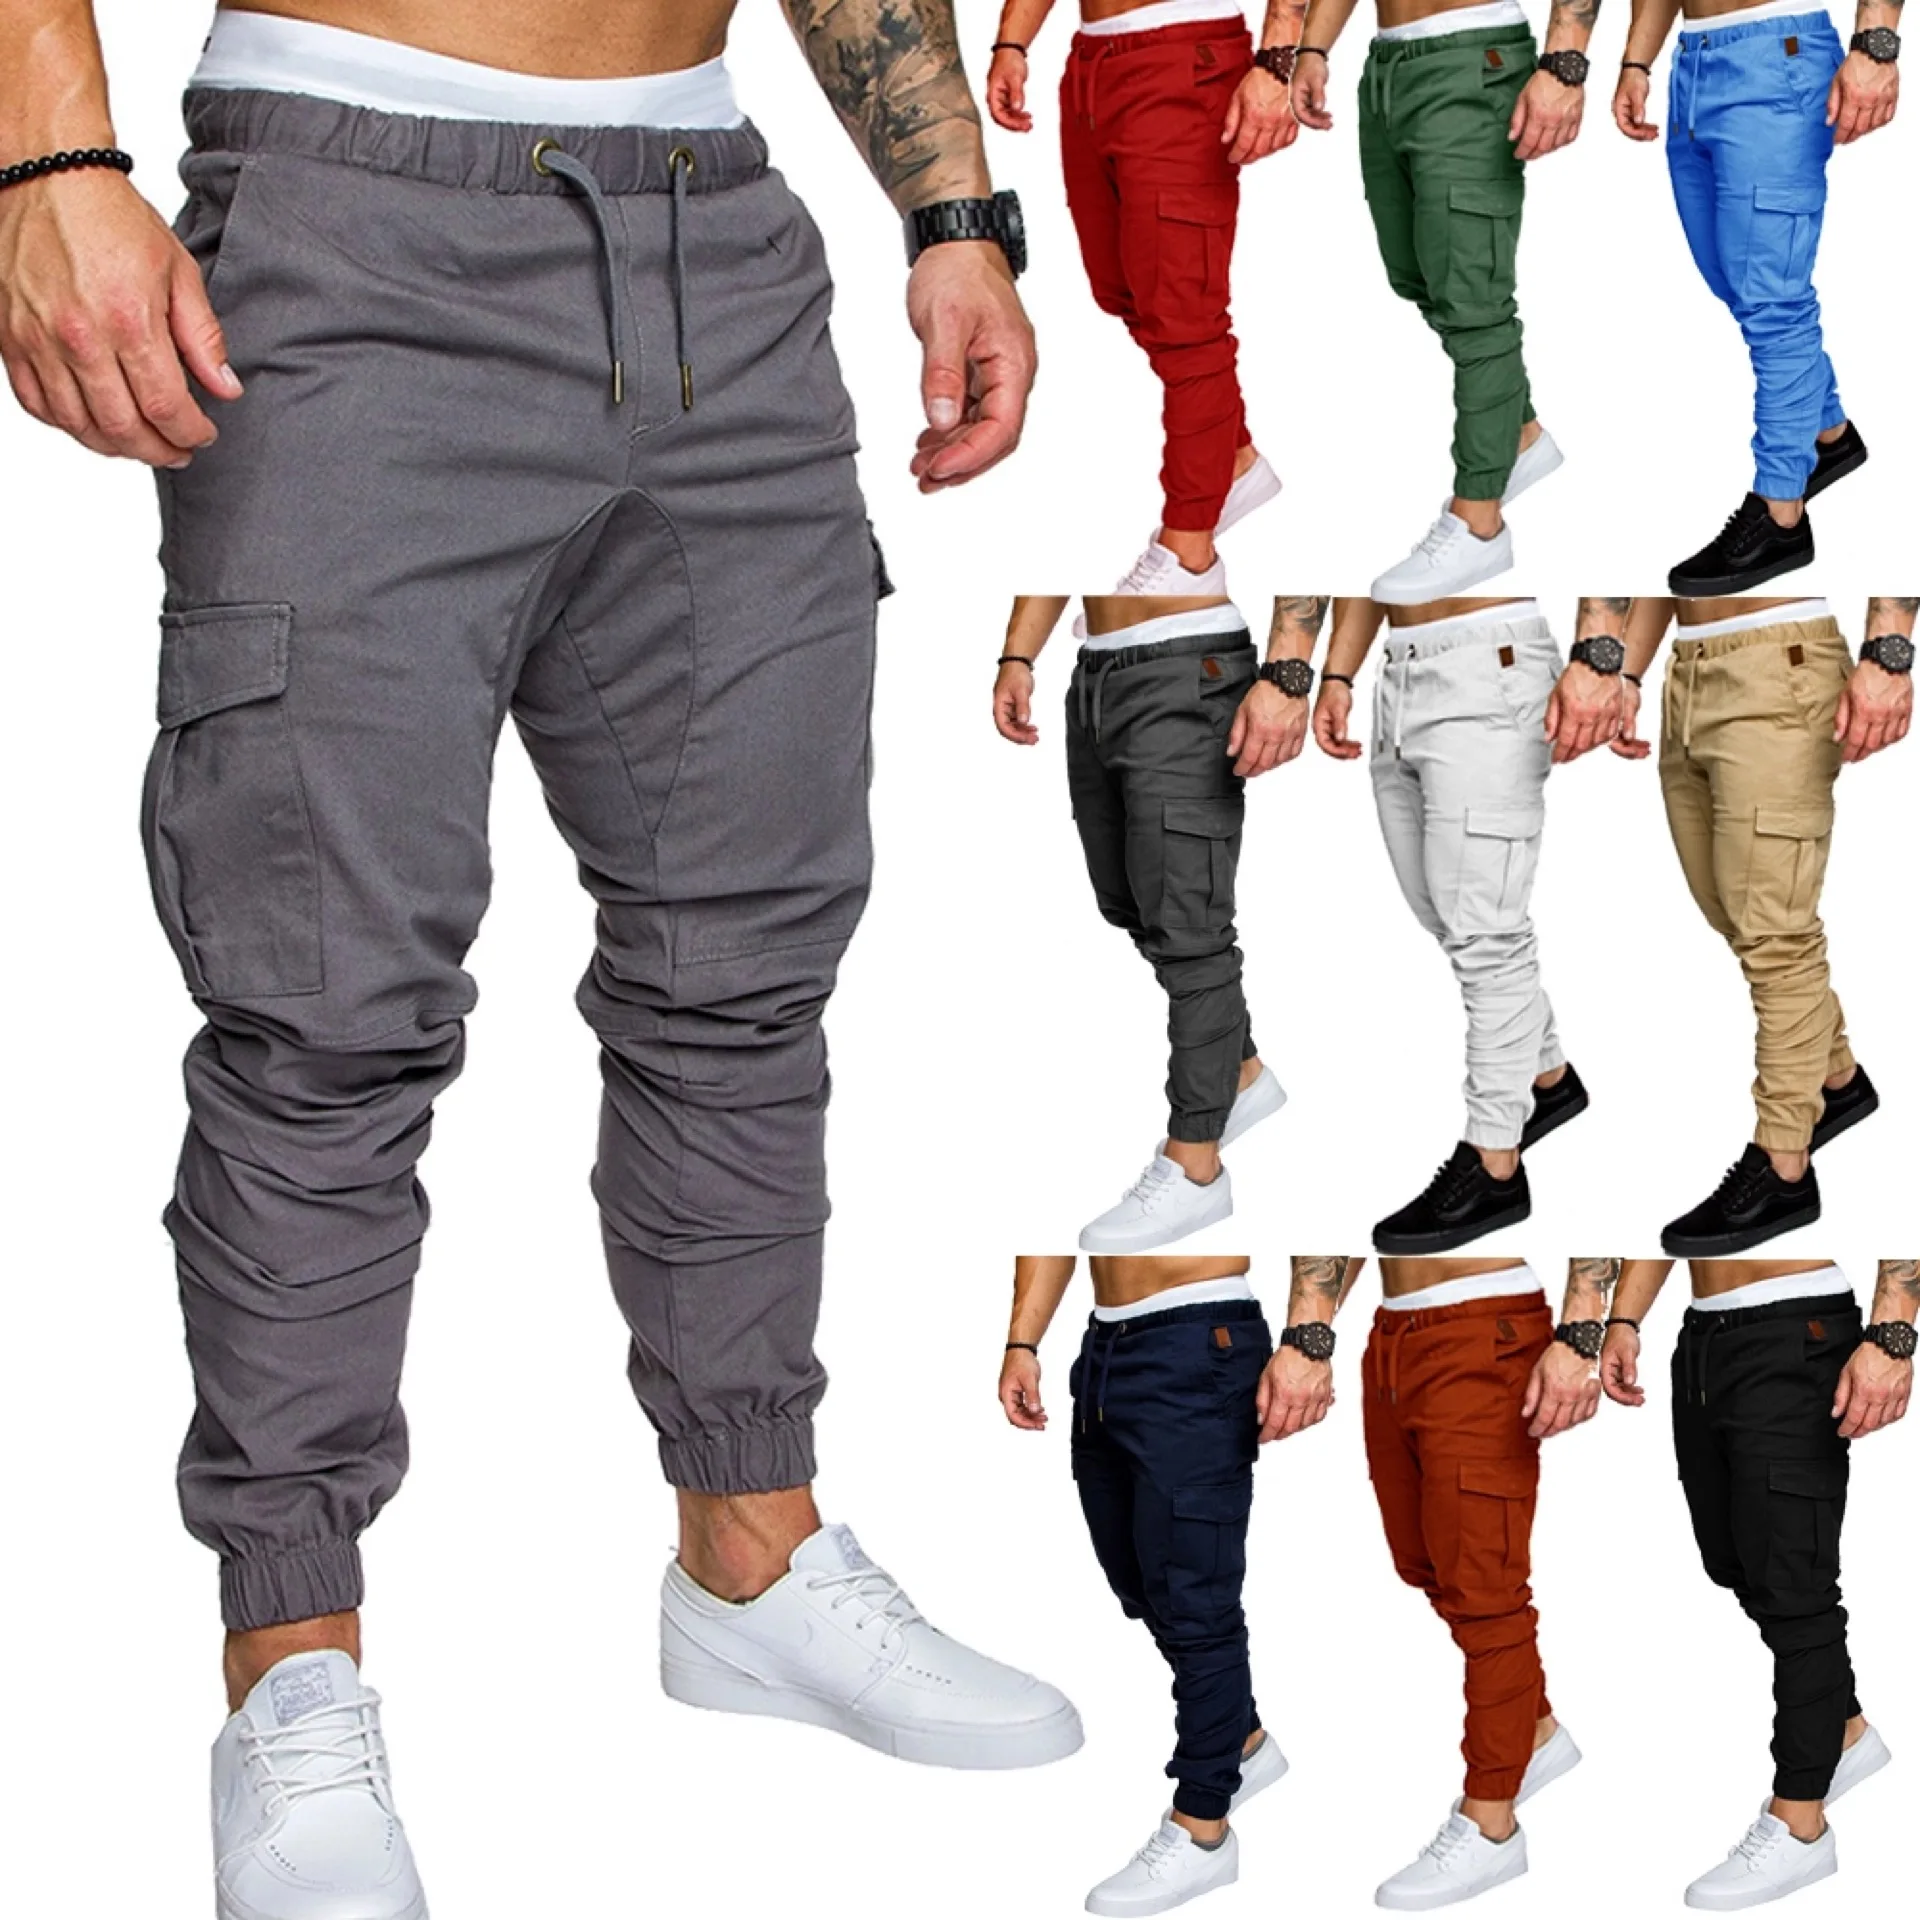 

Hot! New Global Men's Casual Tethered Elastic Sports Baggy Pants Trousers Sports Outdoor Jogging Equipment 10 Colors M-XXXXL